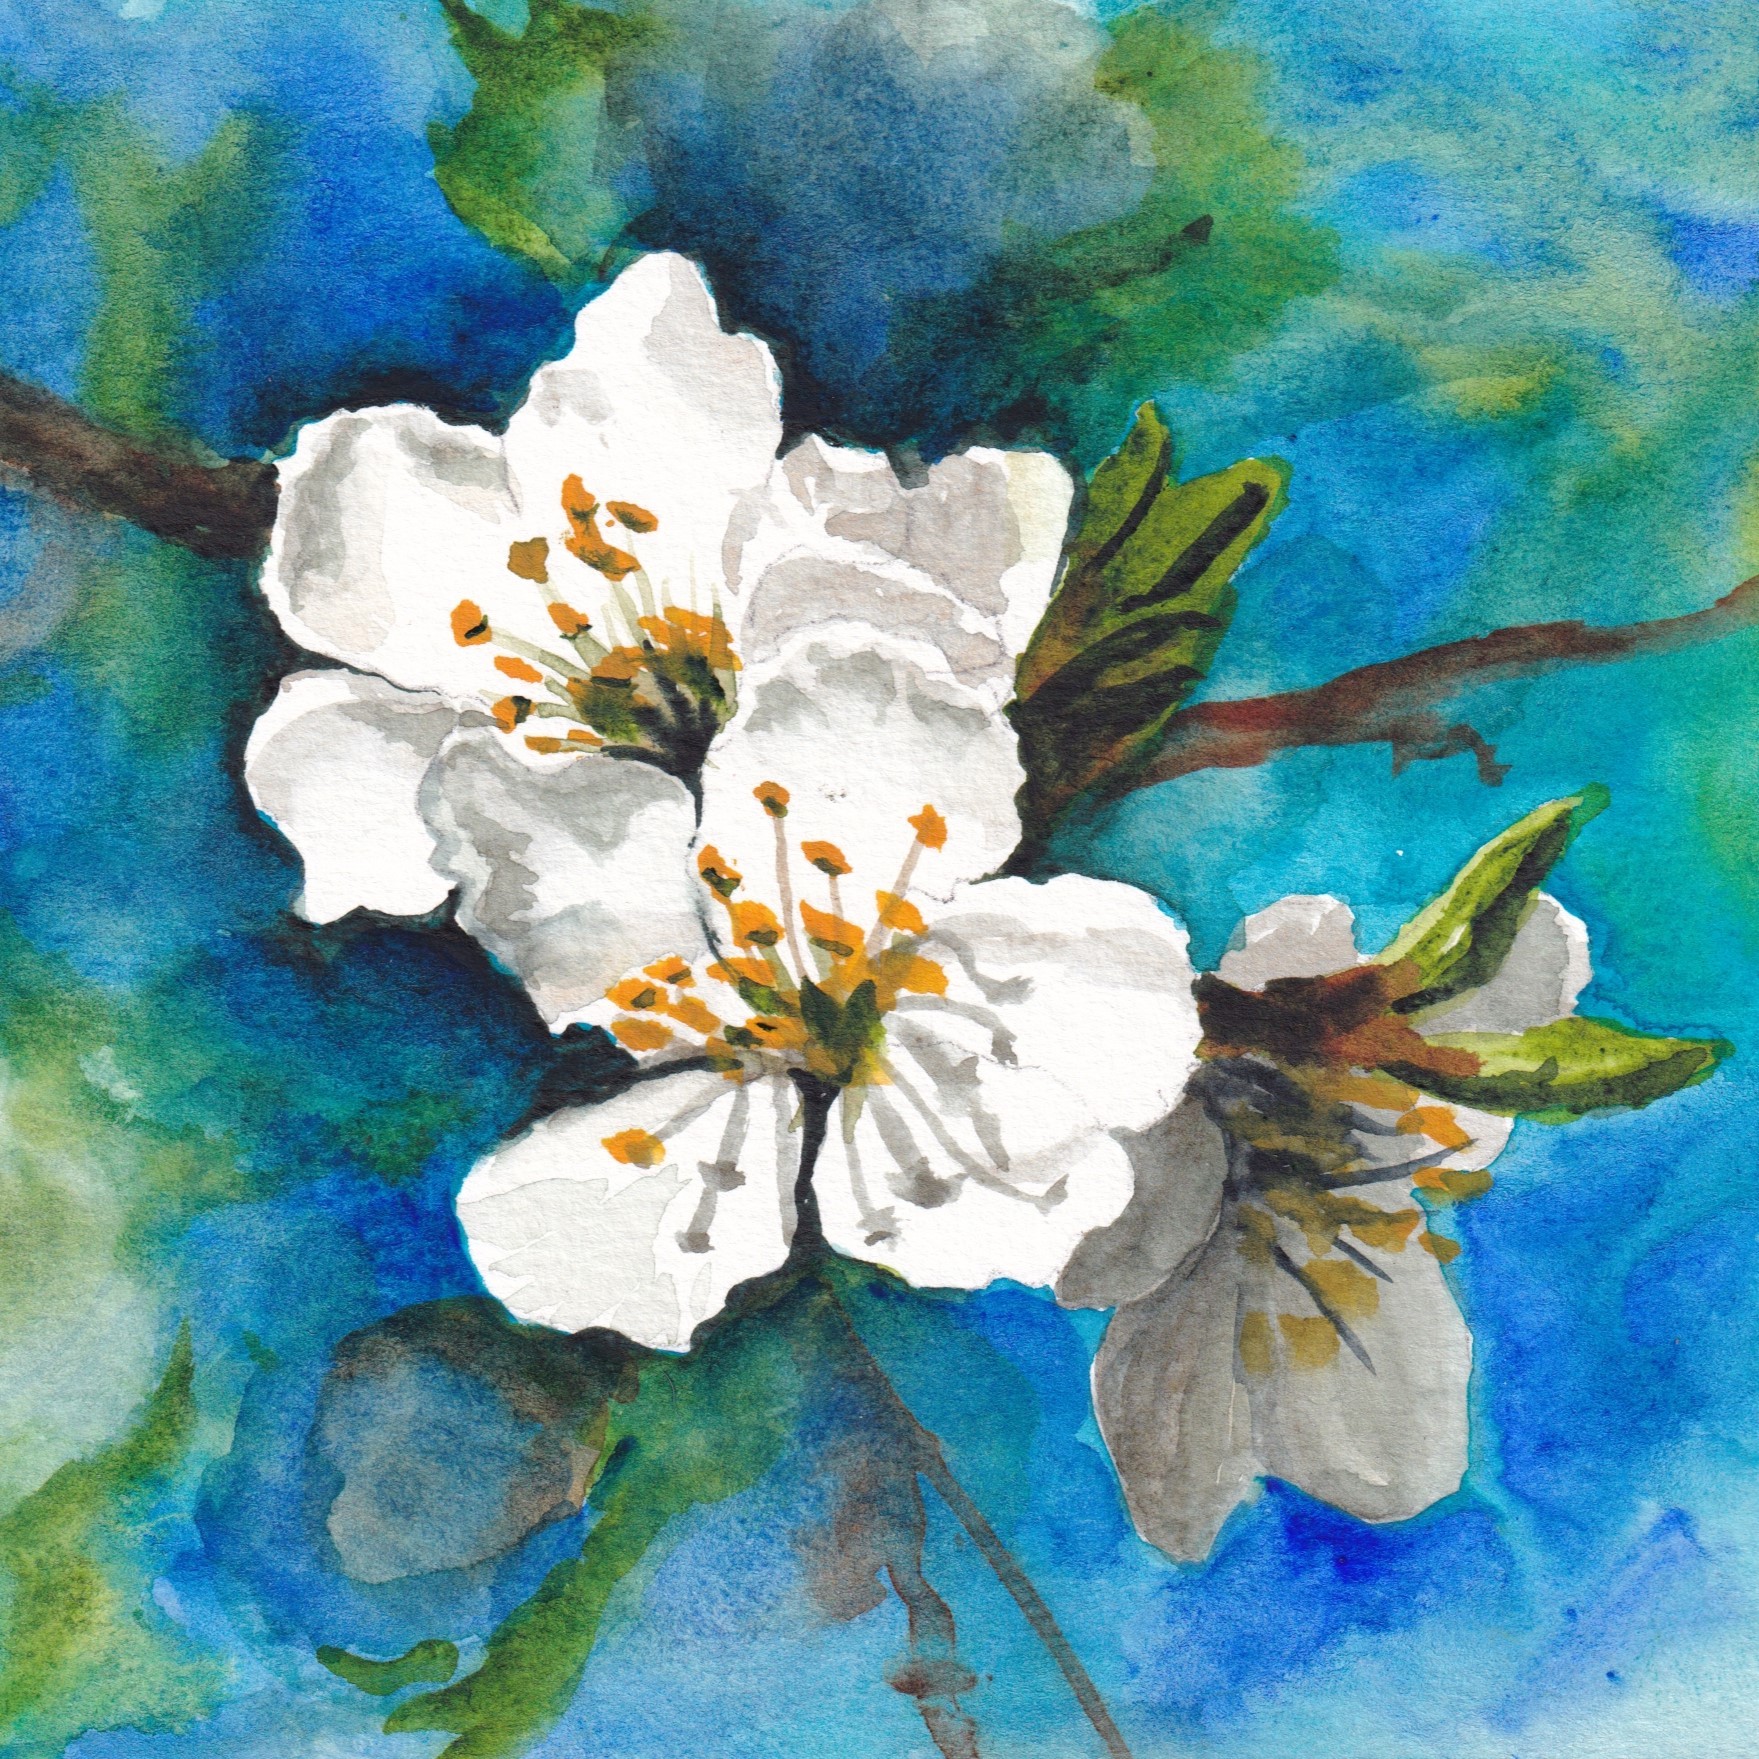 Early Spring Watercolor Sketchbook | Gage Academy of Art - Seattle, WA